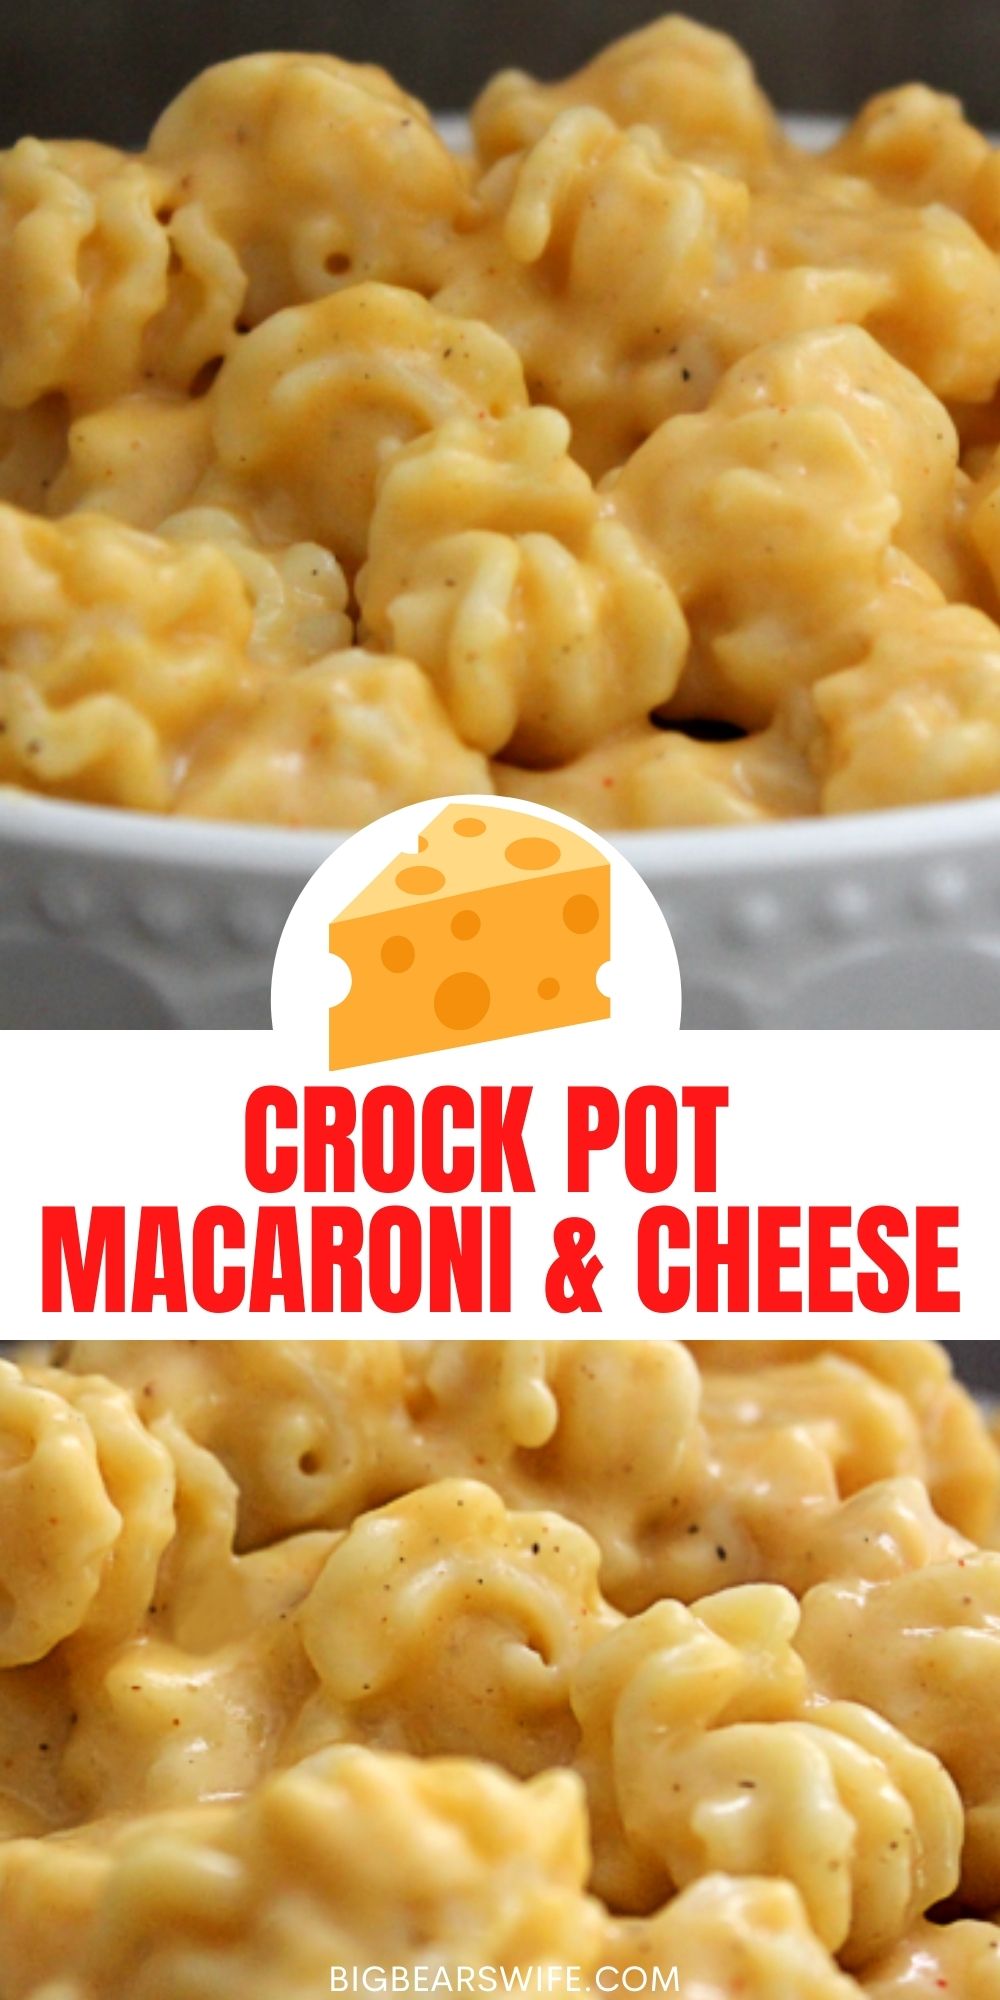 Did you know that you can make Macaroni and Cheese in the slow cooker? You CAN! It's so easy with my favorite Crock Pot Macaroni and Cheese recipe!  via @bigbearswife